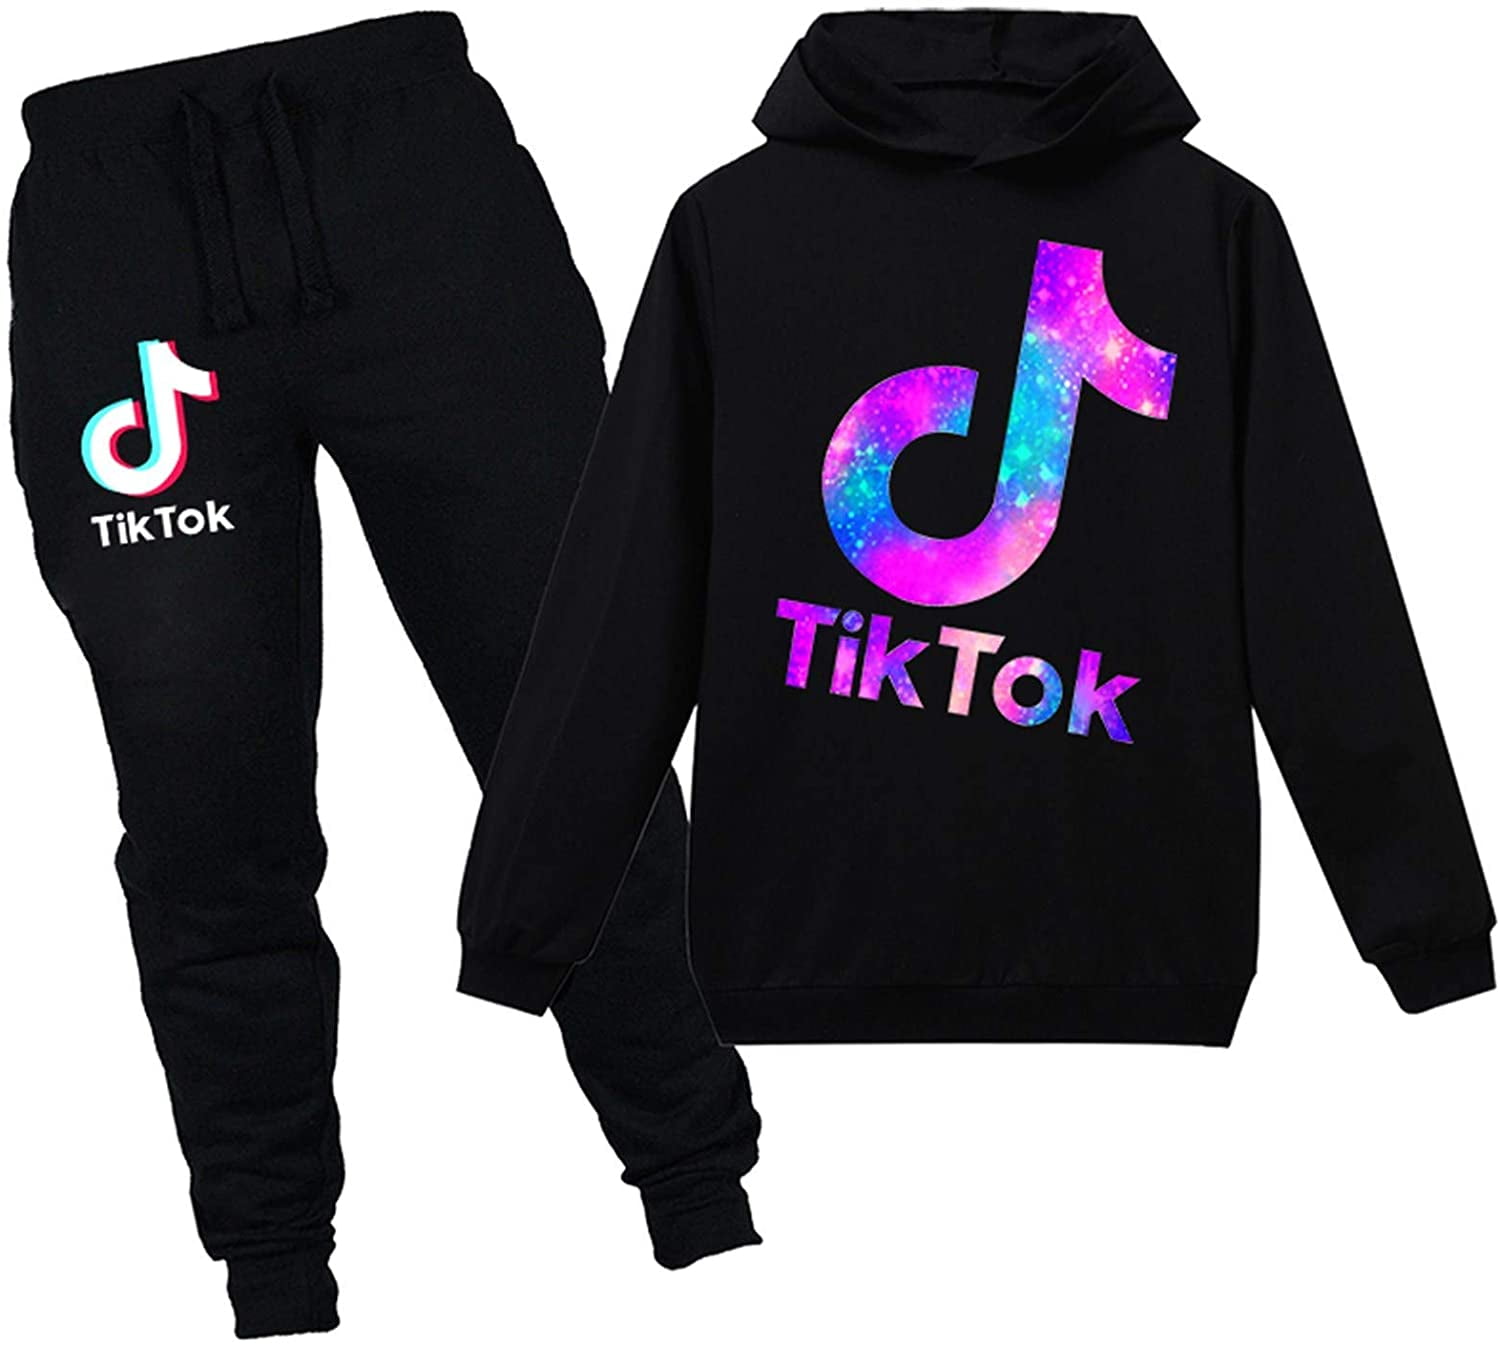 Boys Girls TIK Tok Pull Over Long Sleeve Hoodies and Sweatpants Set-Graphic Hooded Sweatshirts Set for Kids 2T-14Y,9 Colors